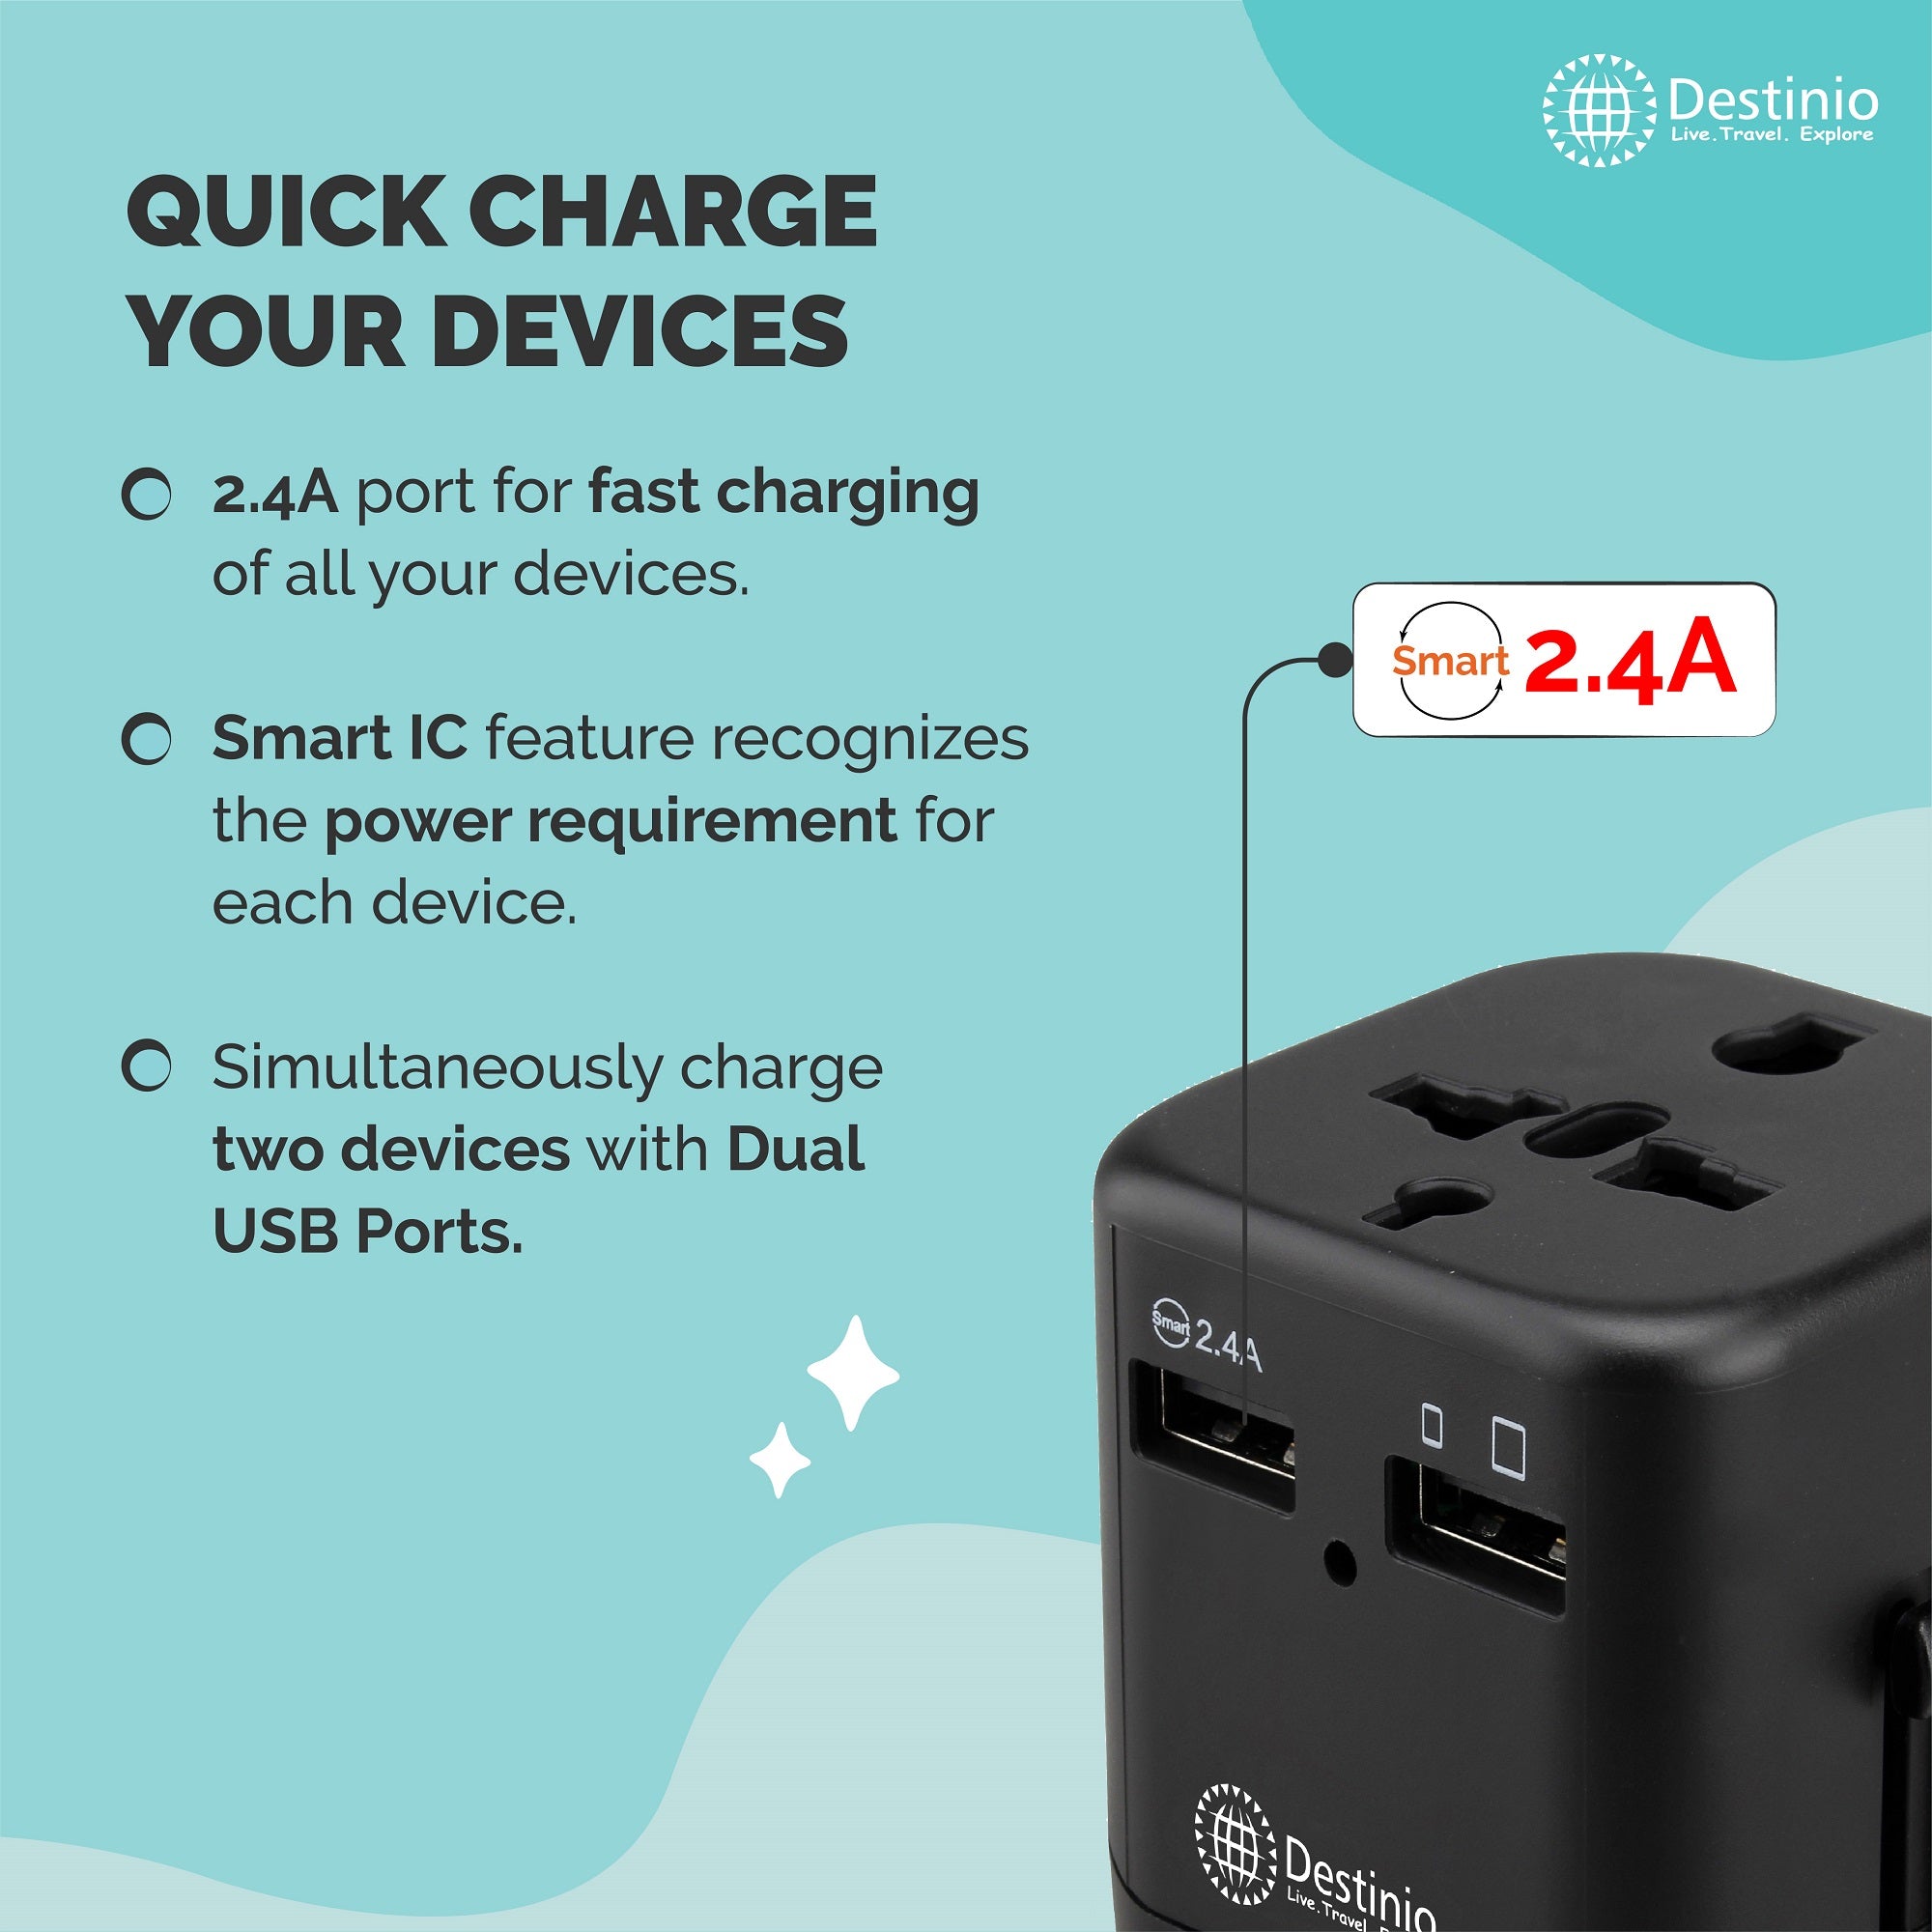 Green Lion Universal Travel Adapter - Stay Connected Worldwide